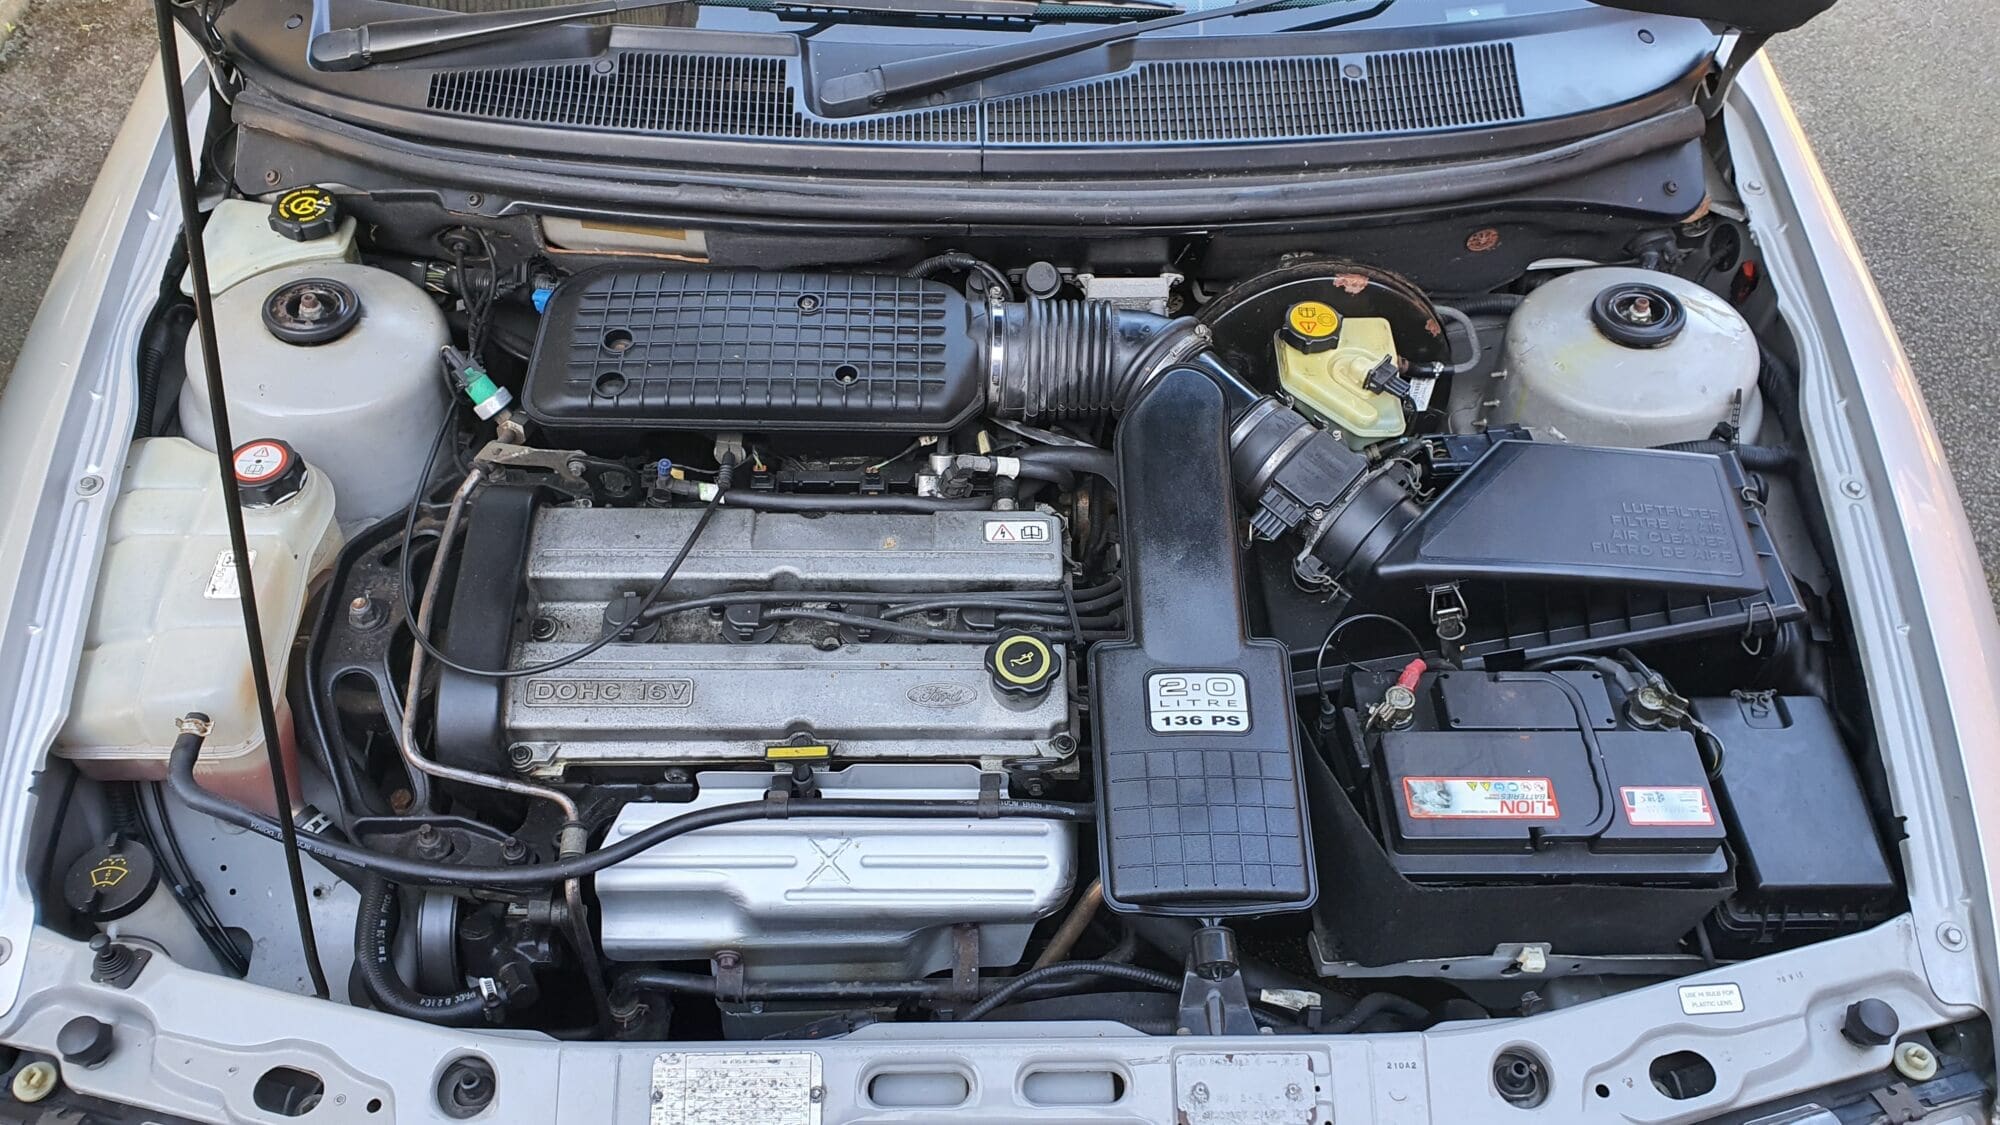 Ford Mondeo Si engine